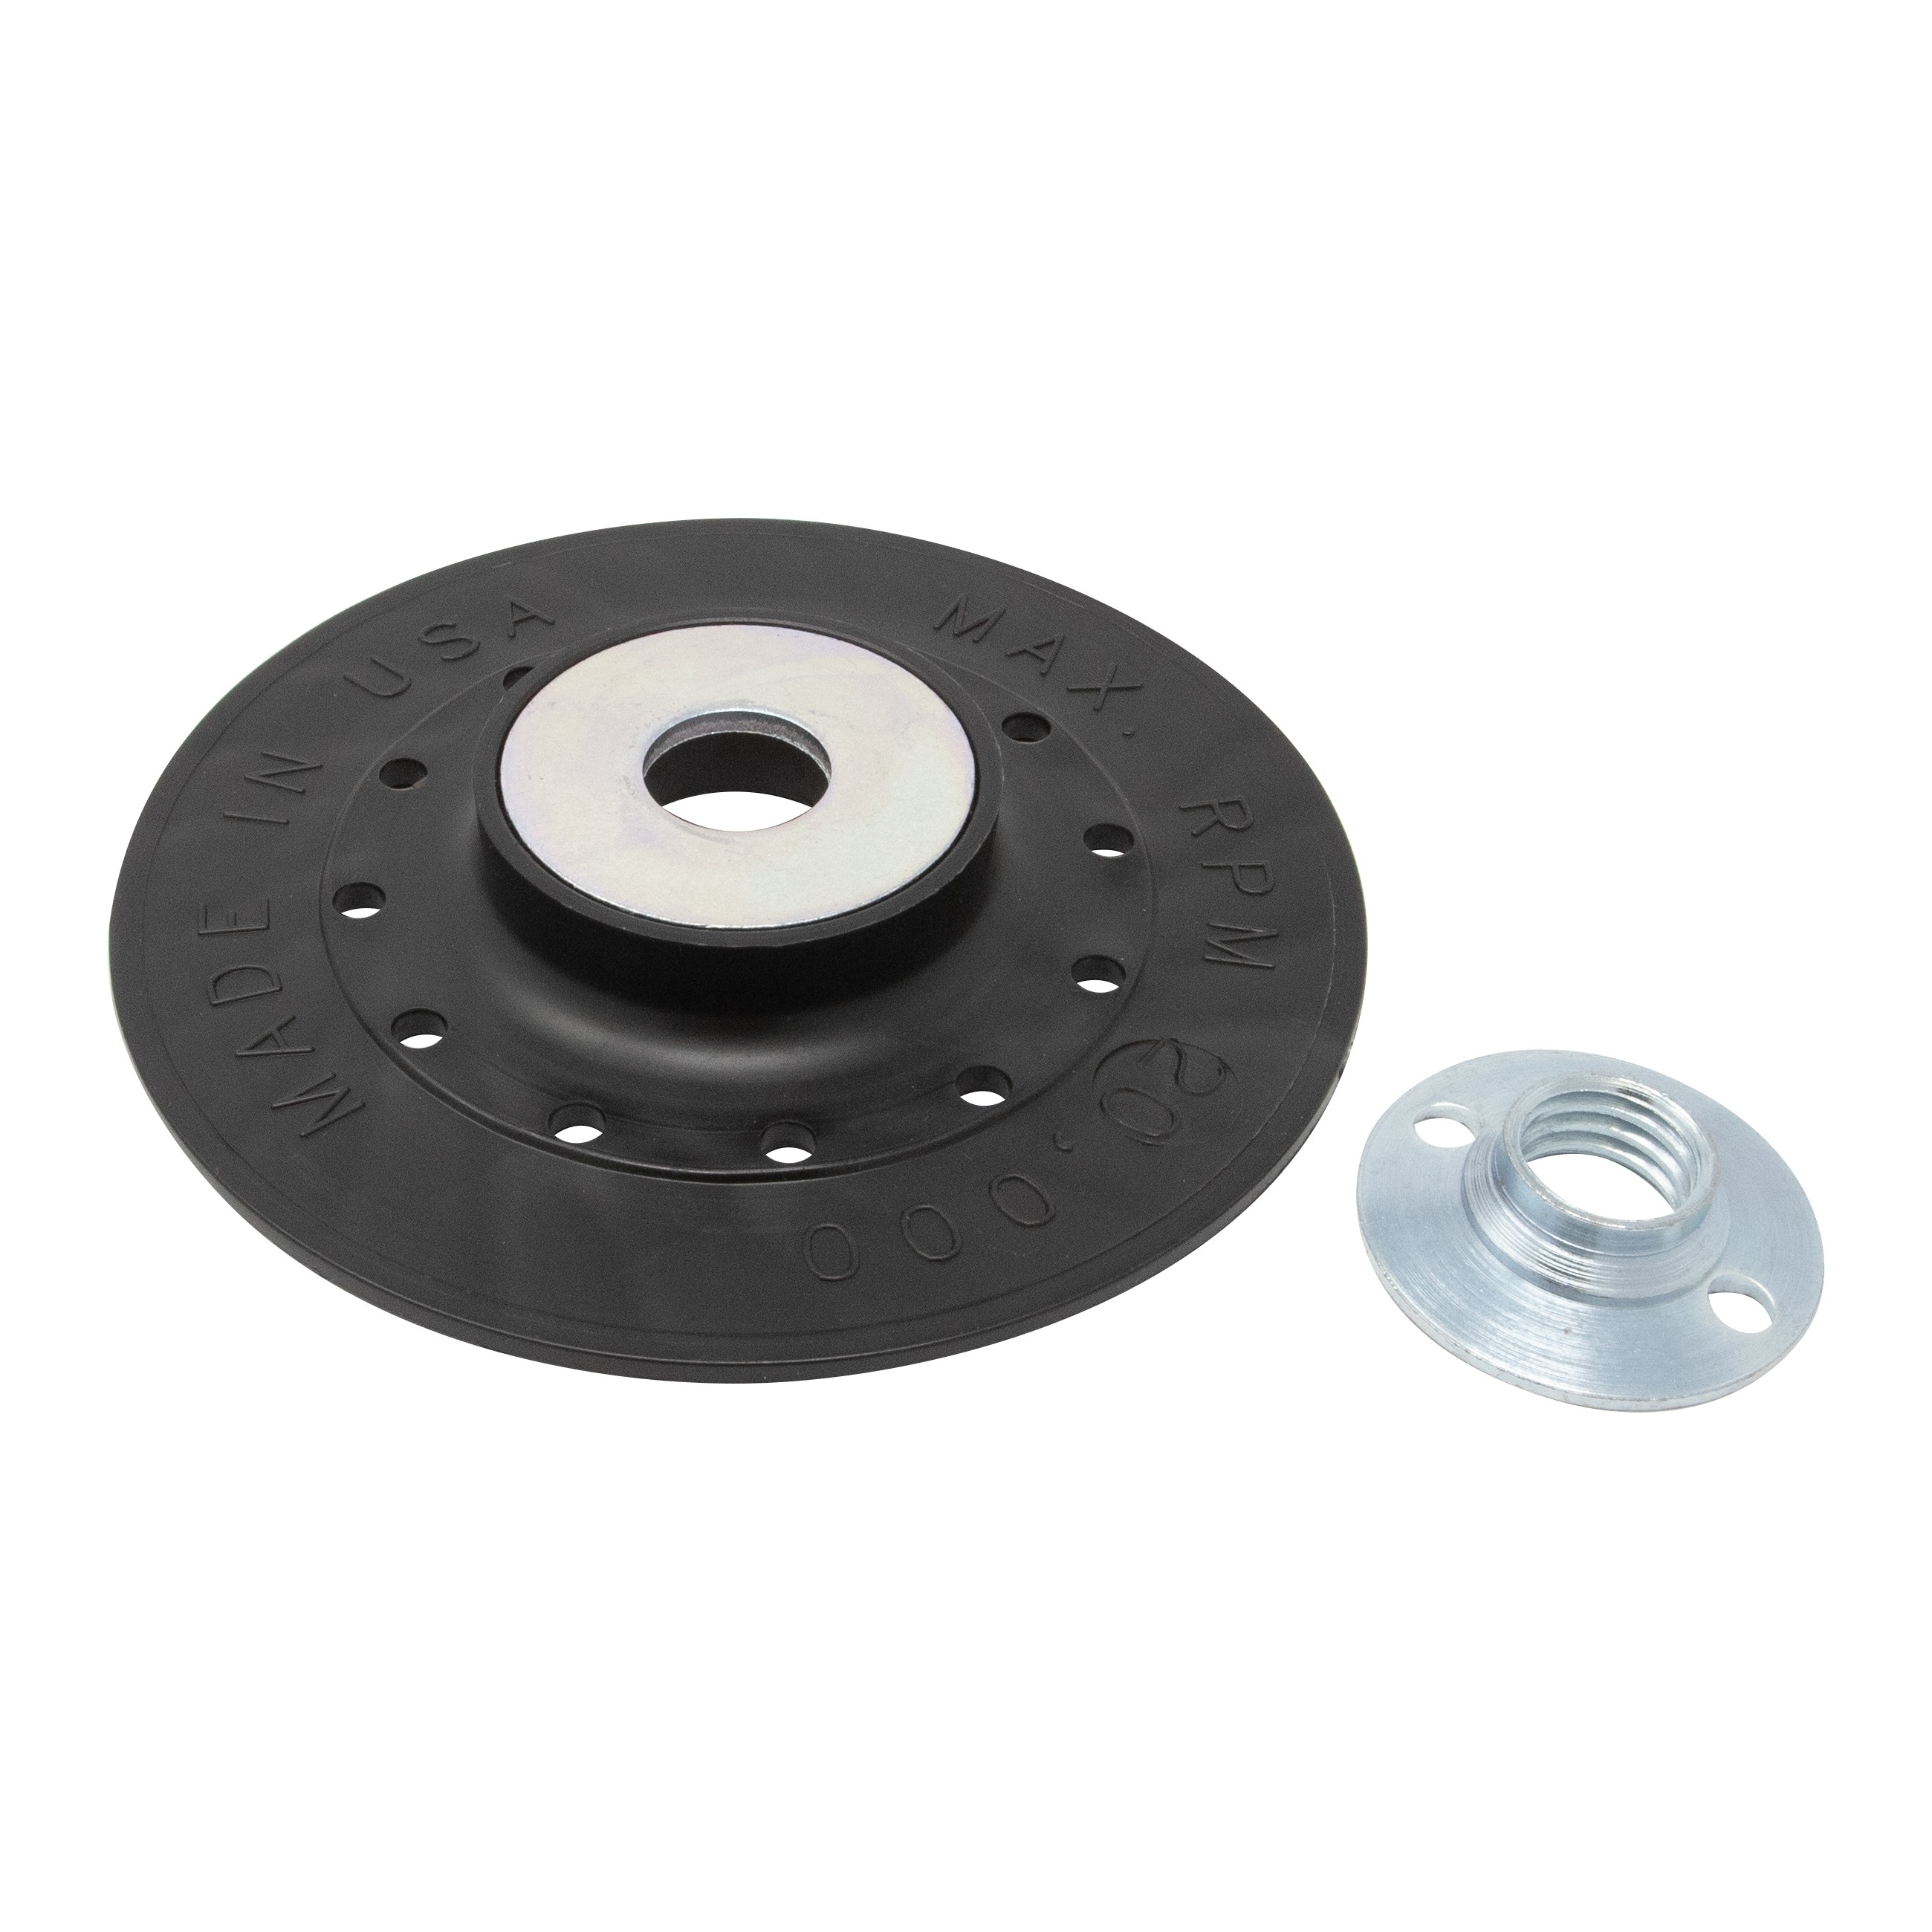 4-1/2" x 7/8" Ventilated Backing Plate with 5/8"-11 Flange Nut